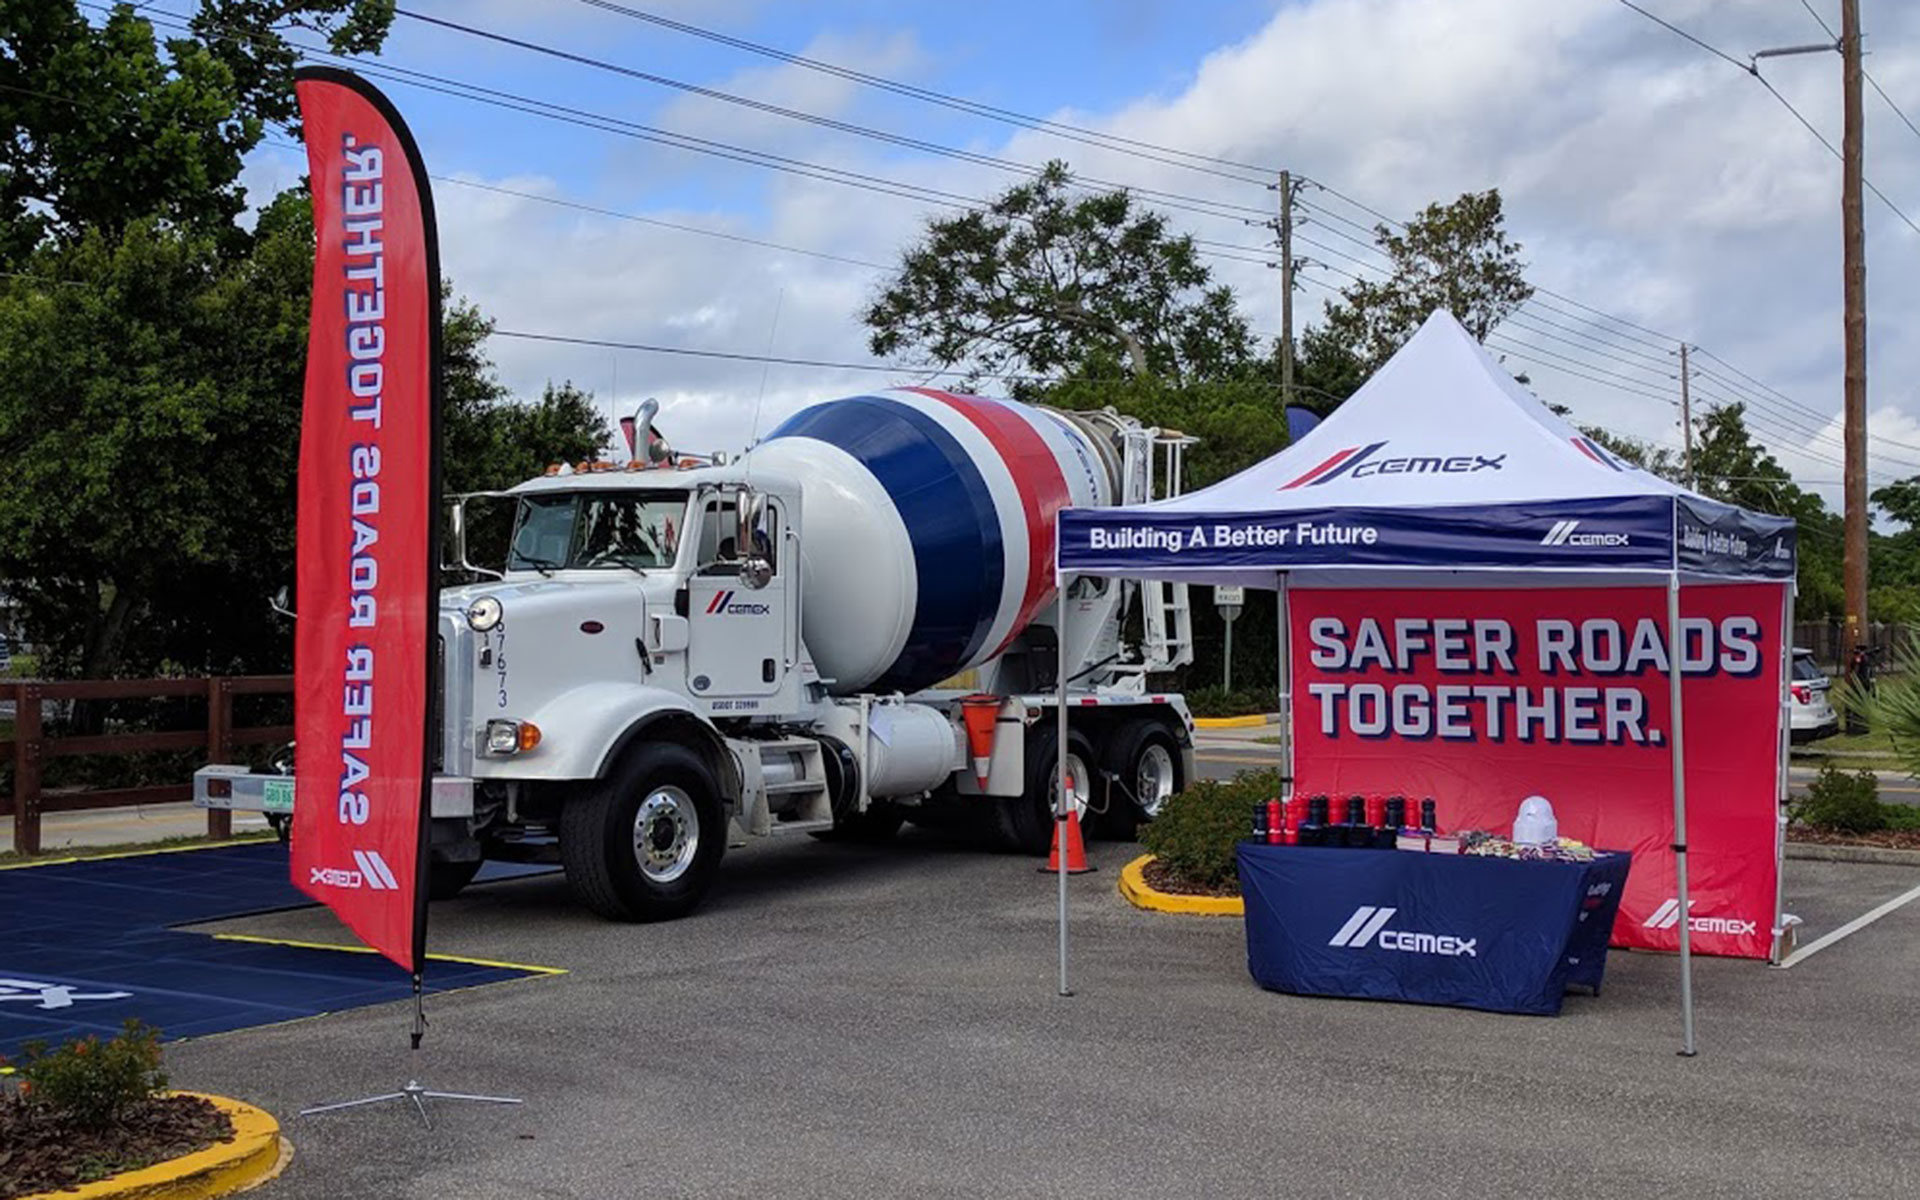 Cemex Promotes Safer Roads With Bike Safety Event In Central